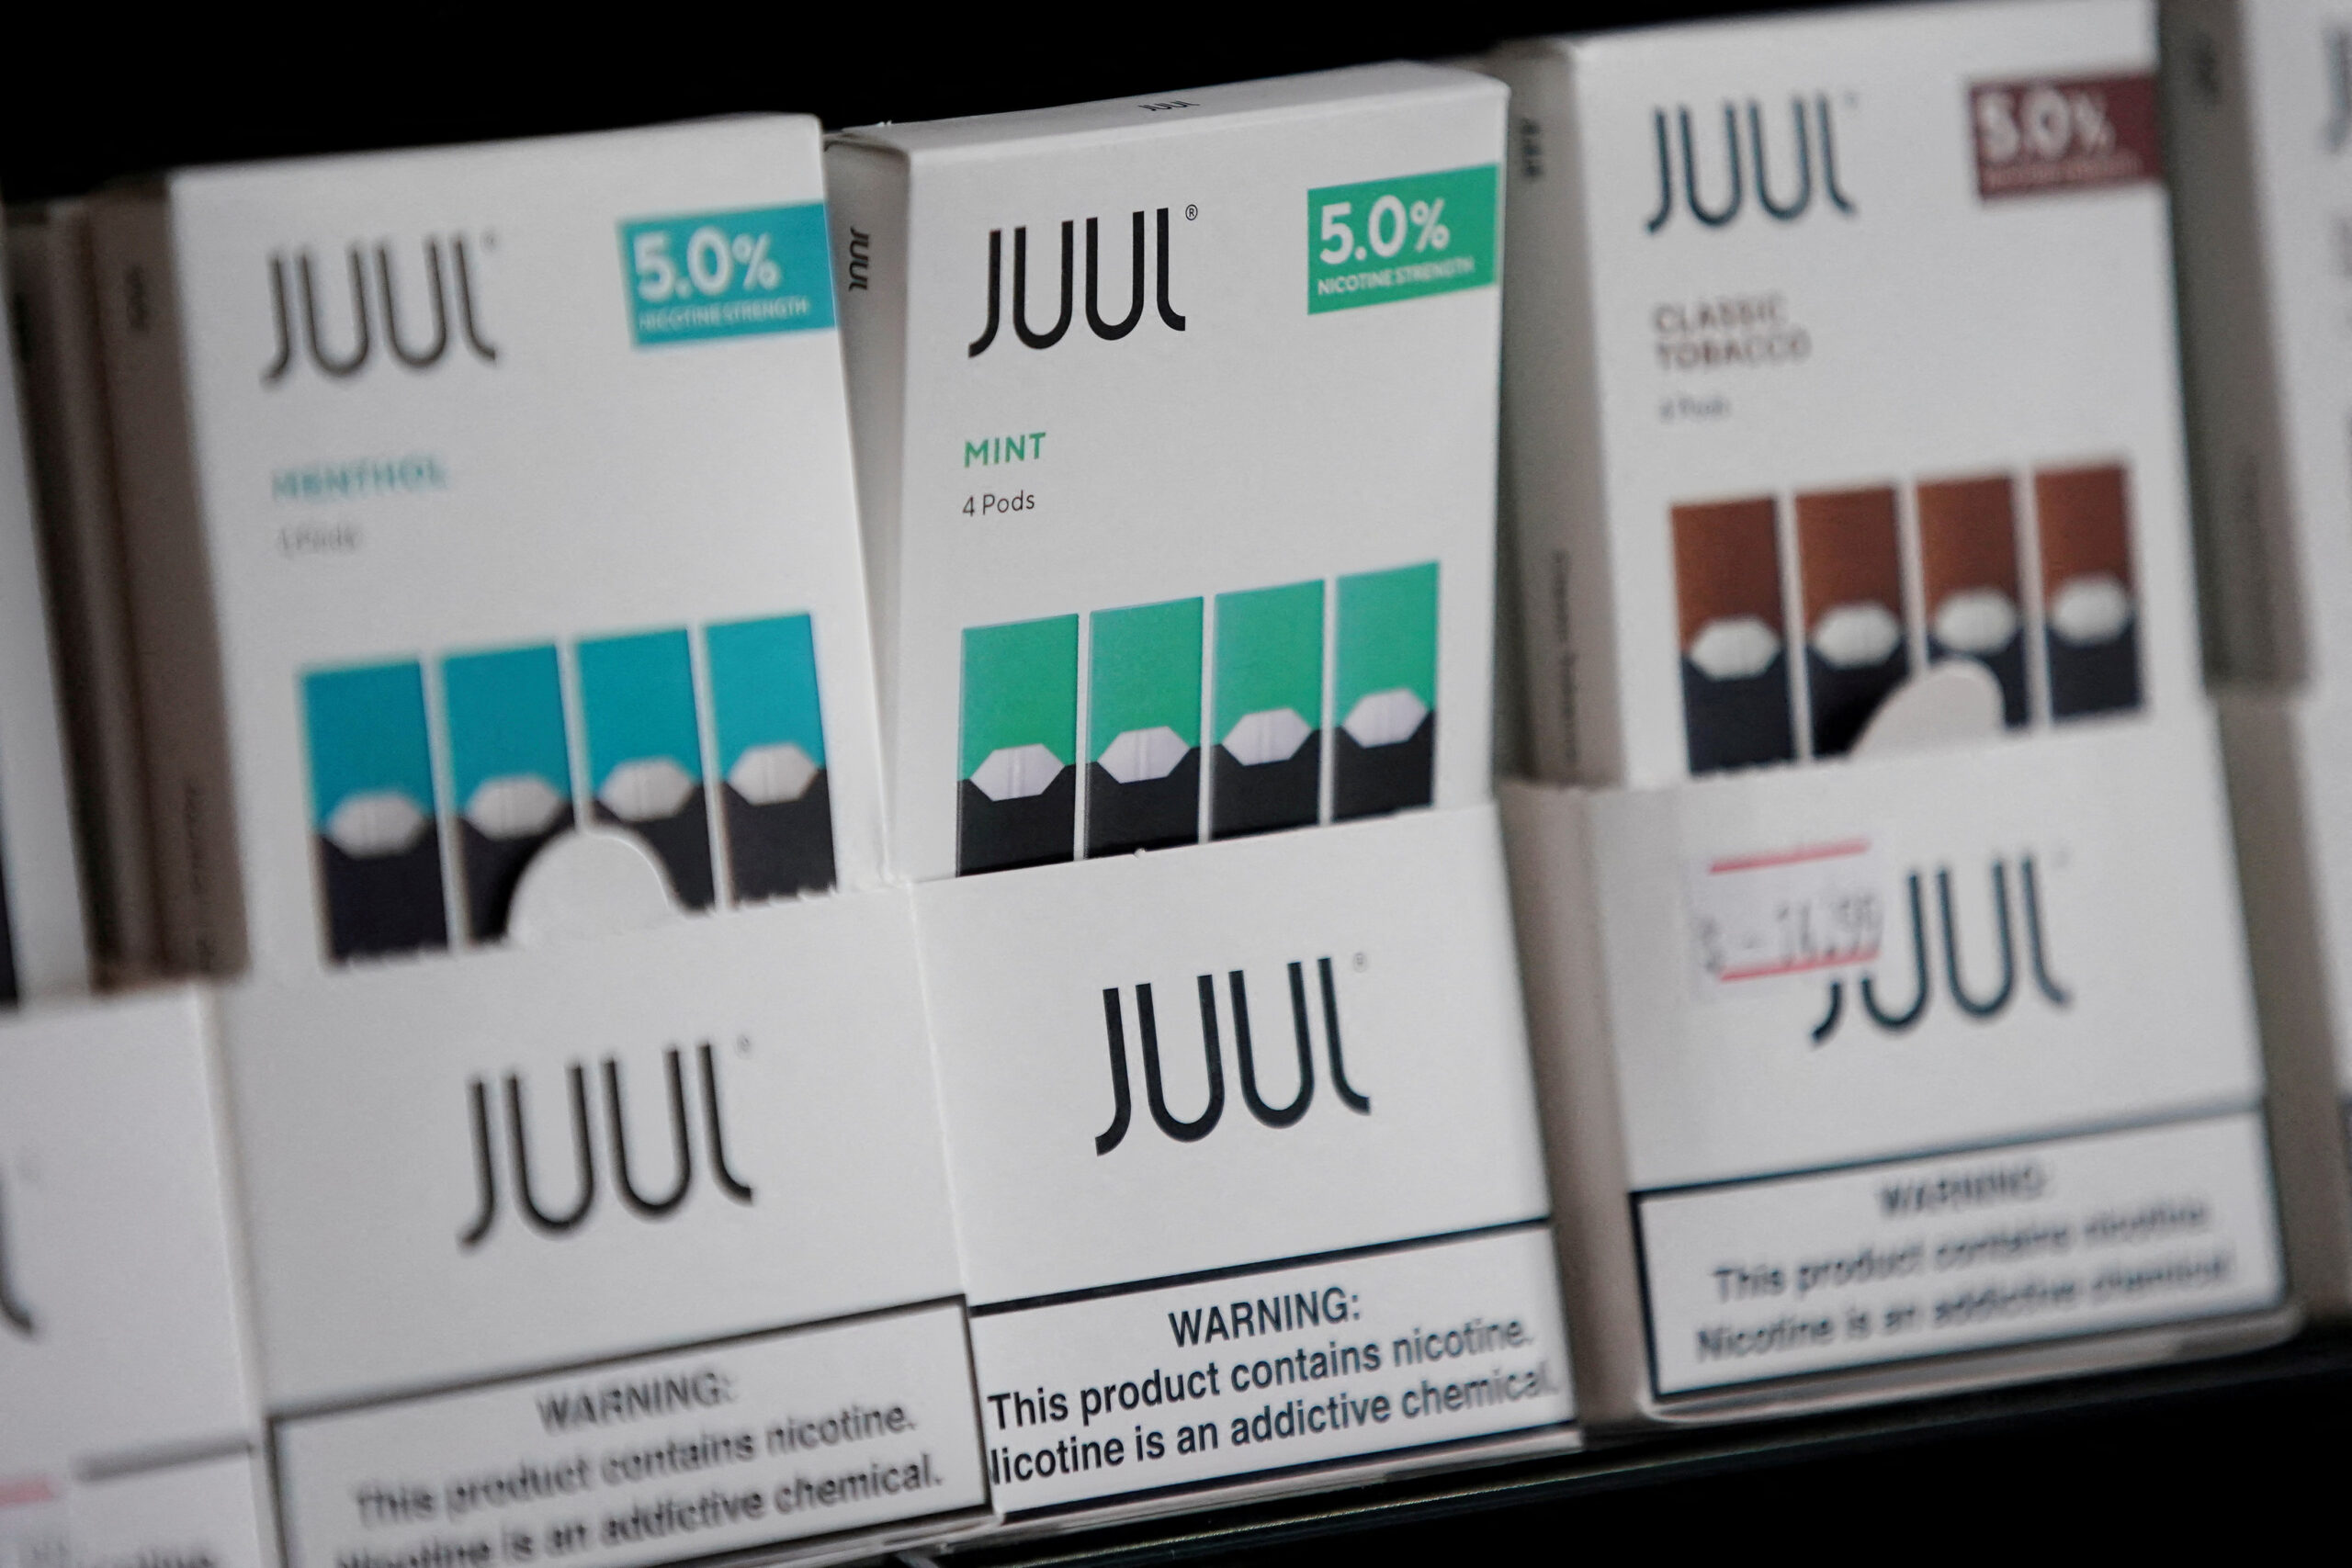 What Types of Ingredients Are in JUUL Pods